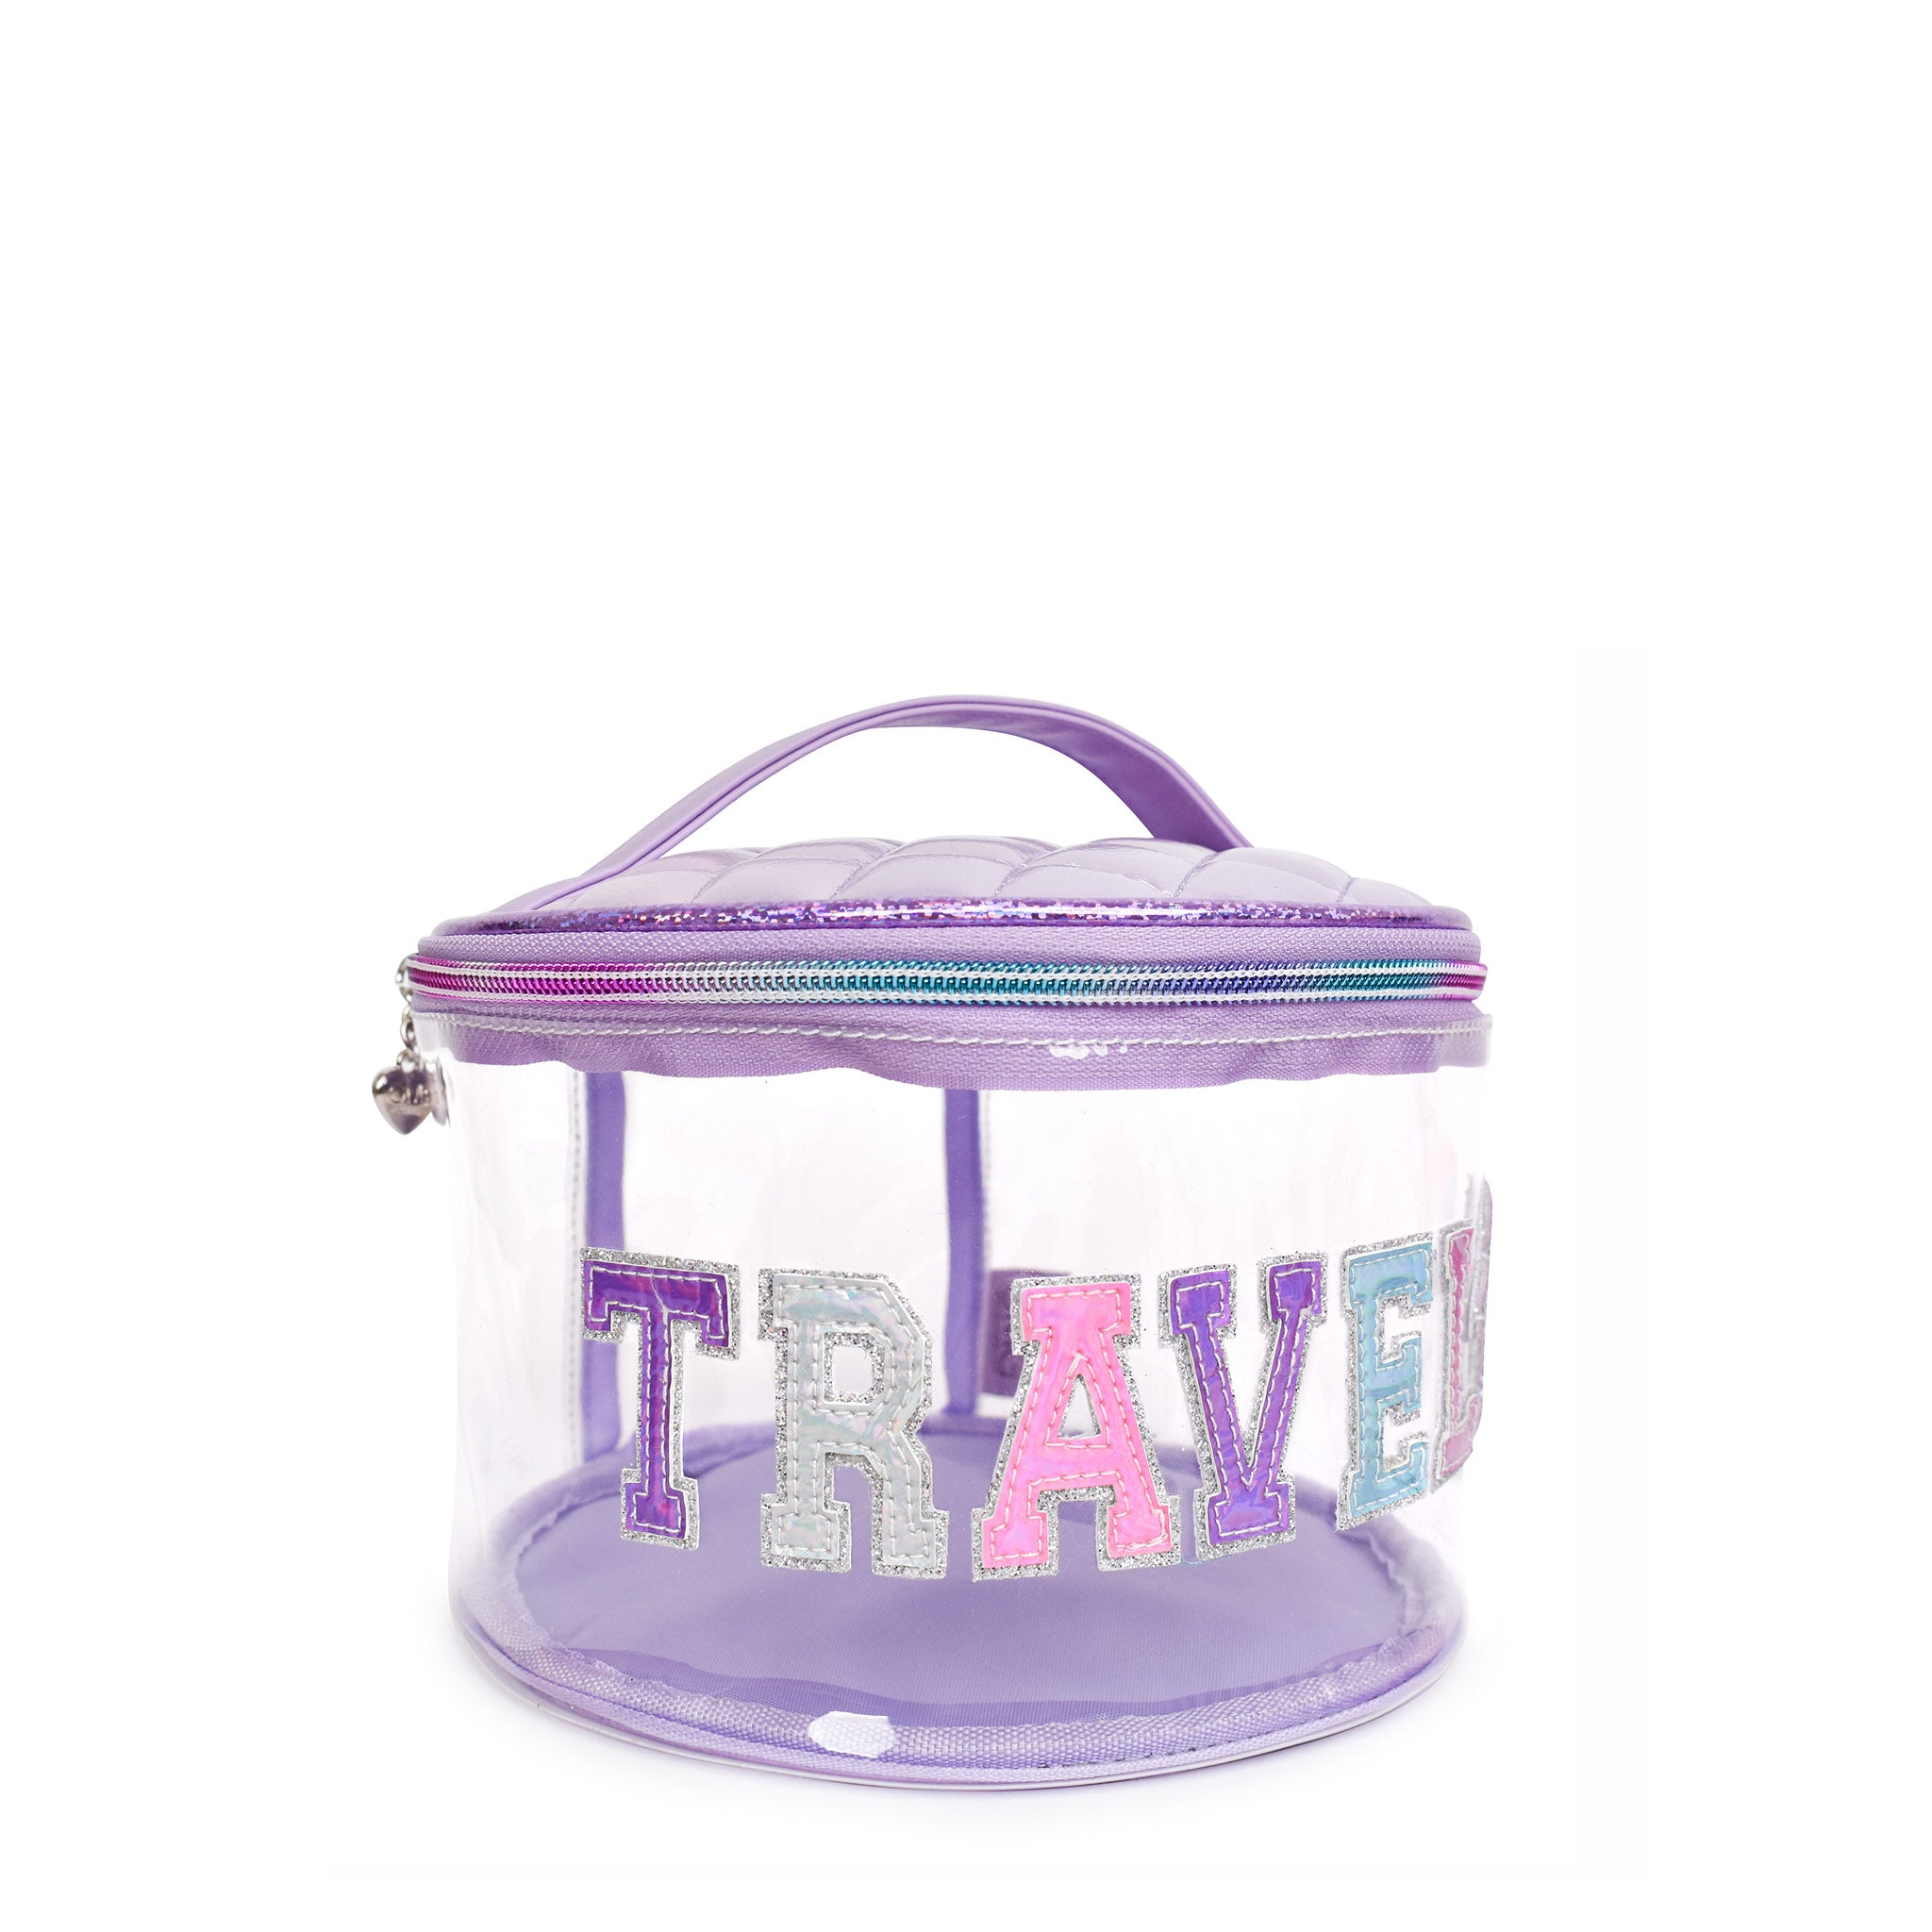 Side view of clear round purple 'Travel' glam bag with reflective varsity-letter patches